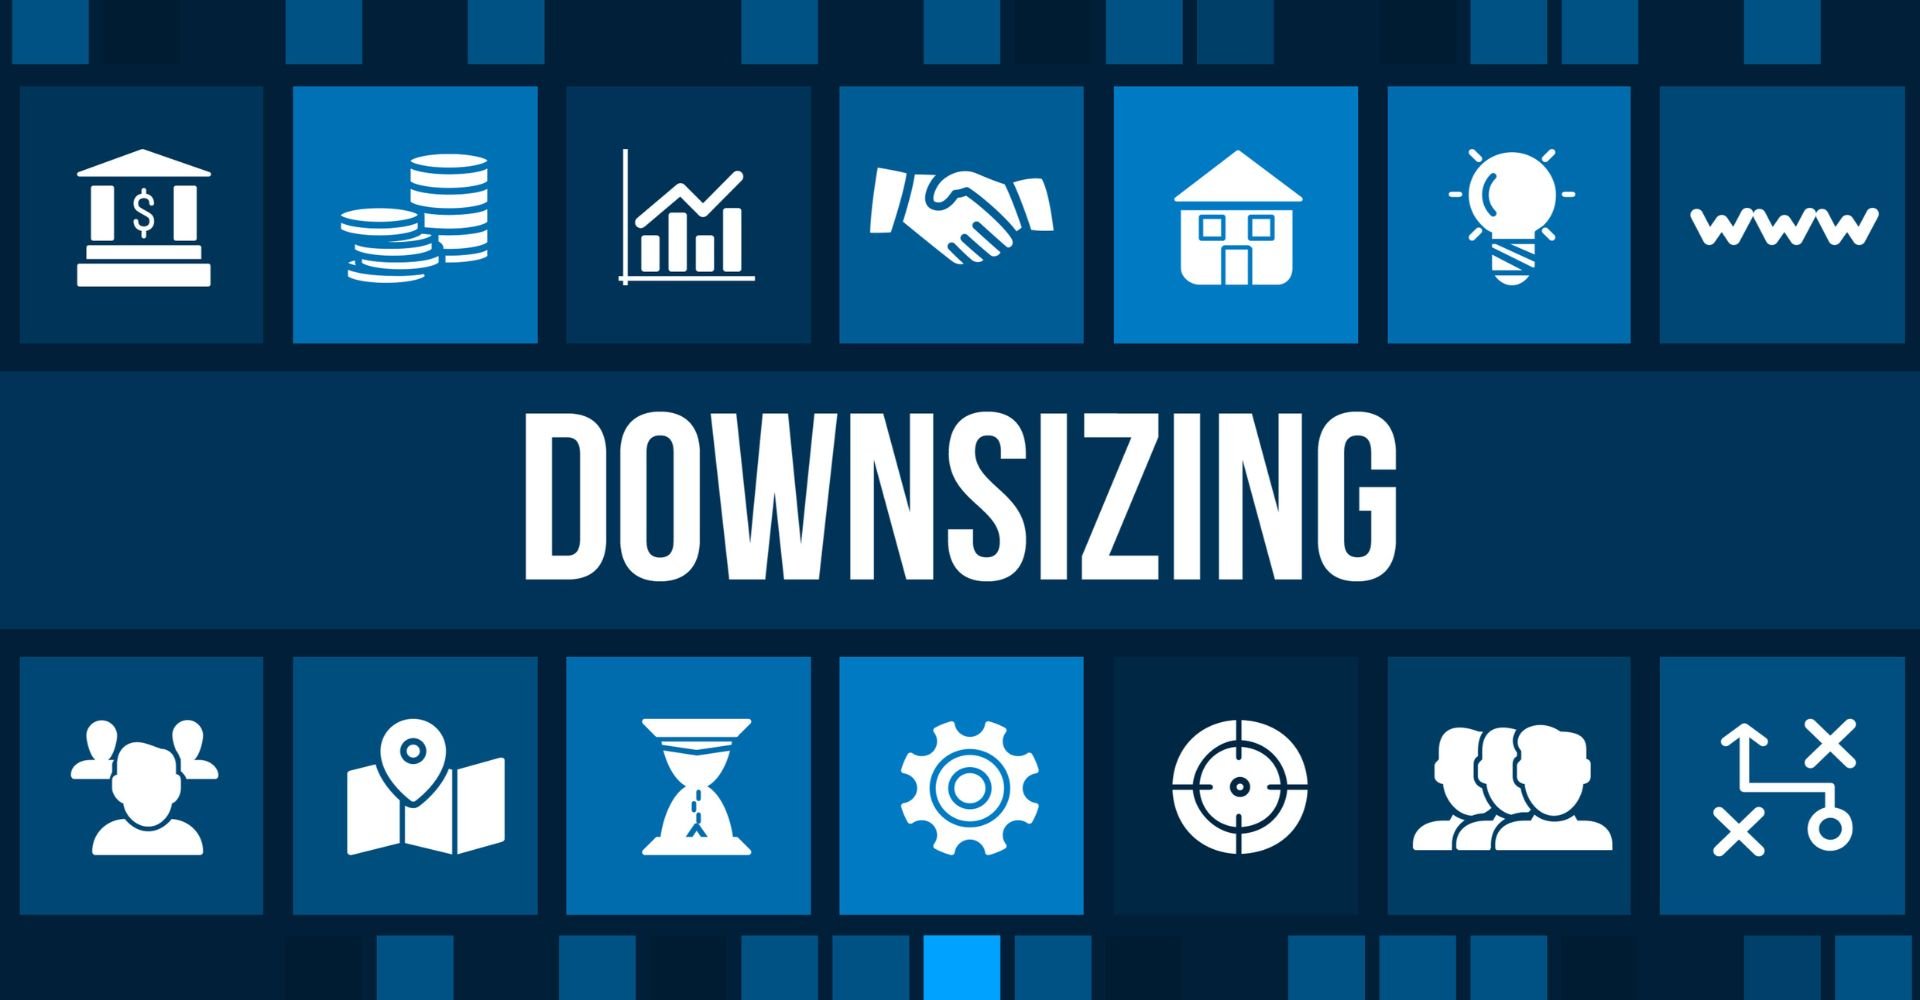 Home Downsizing Tips